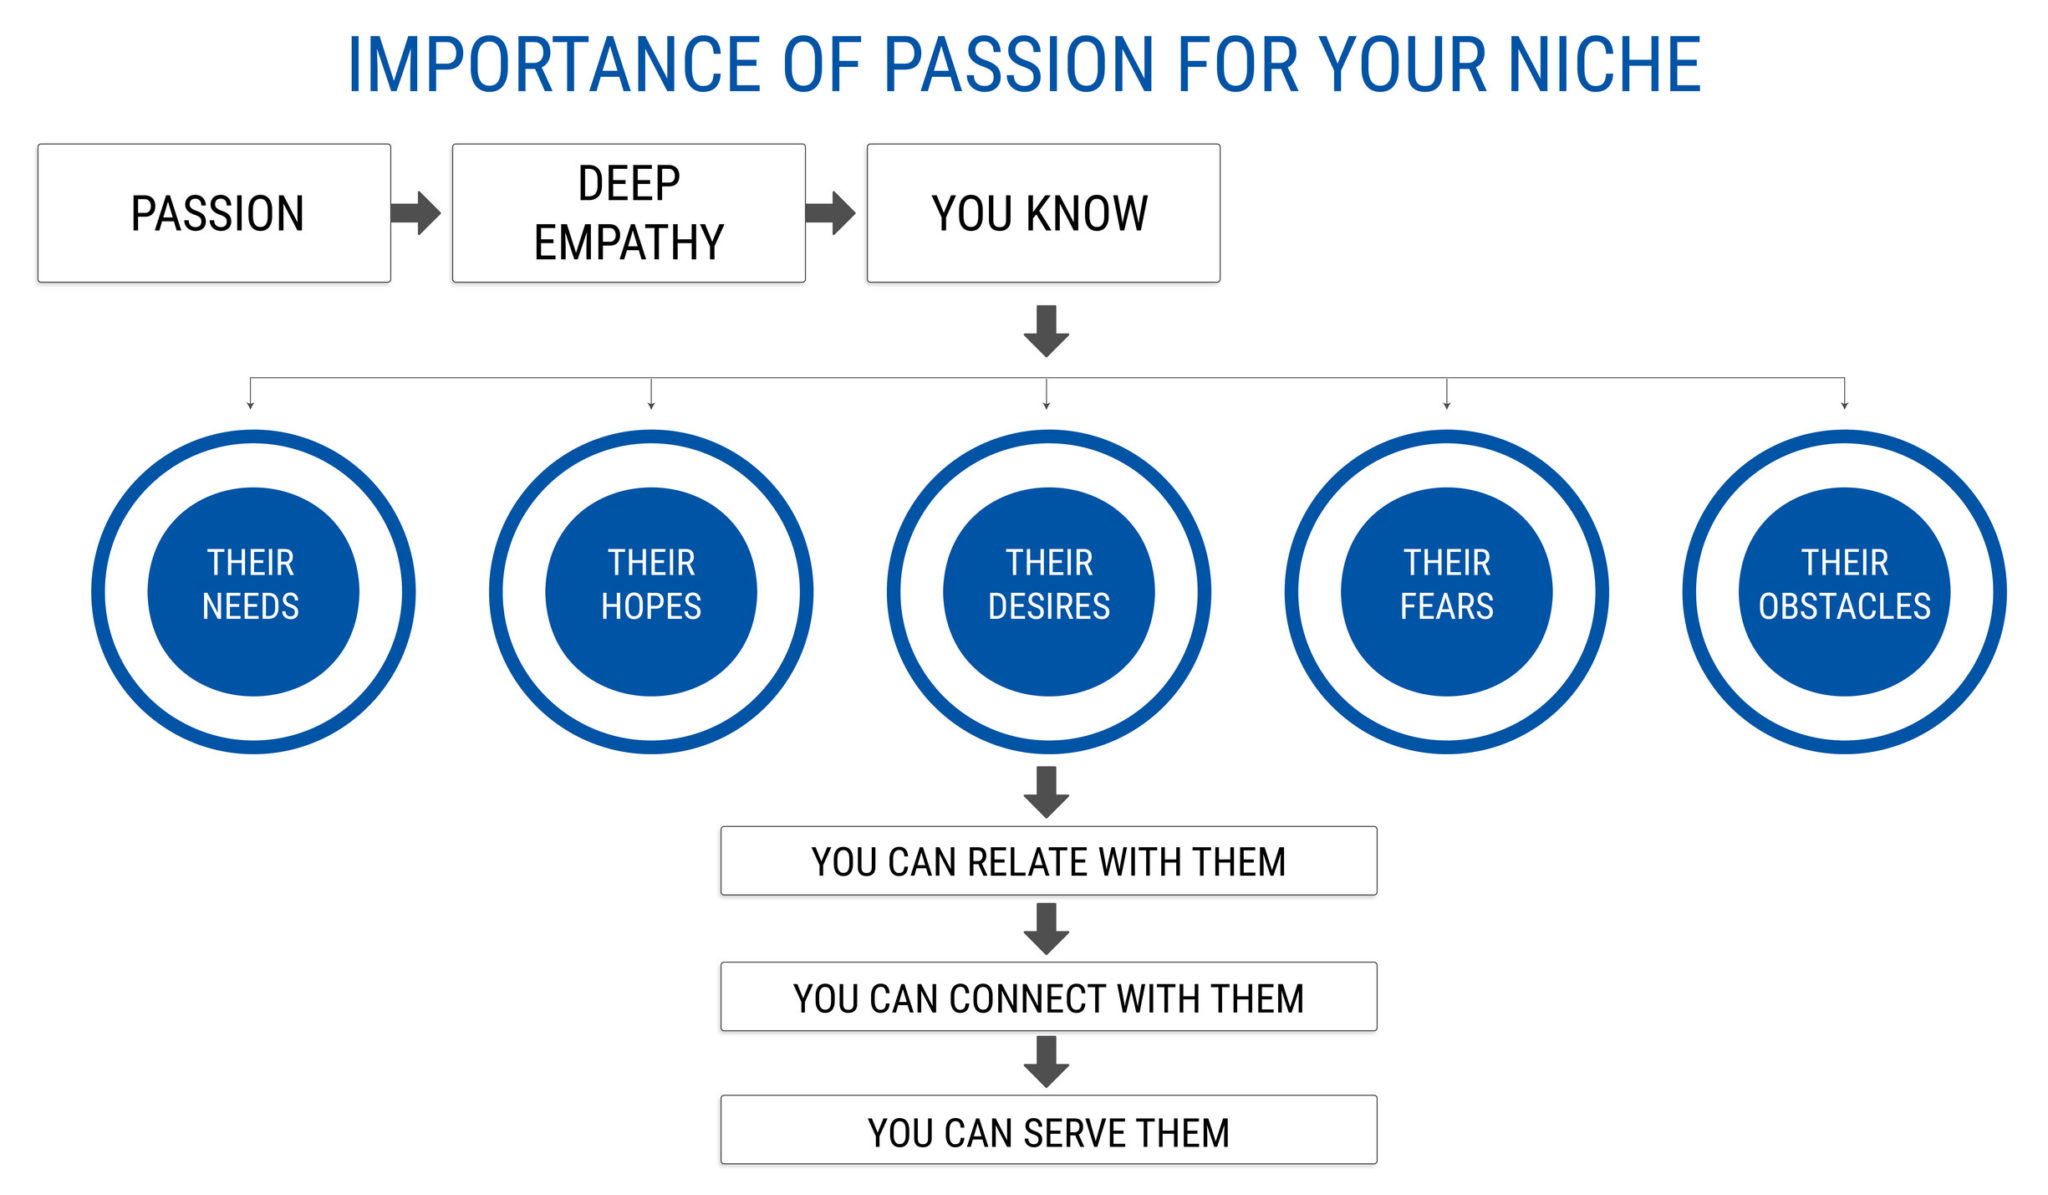 IMPORTANCE OF PASSION FOR YOUR NICHE